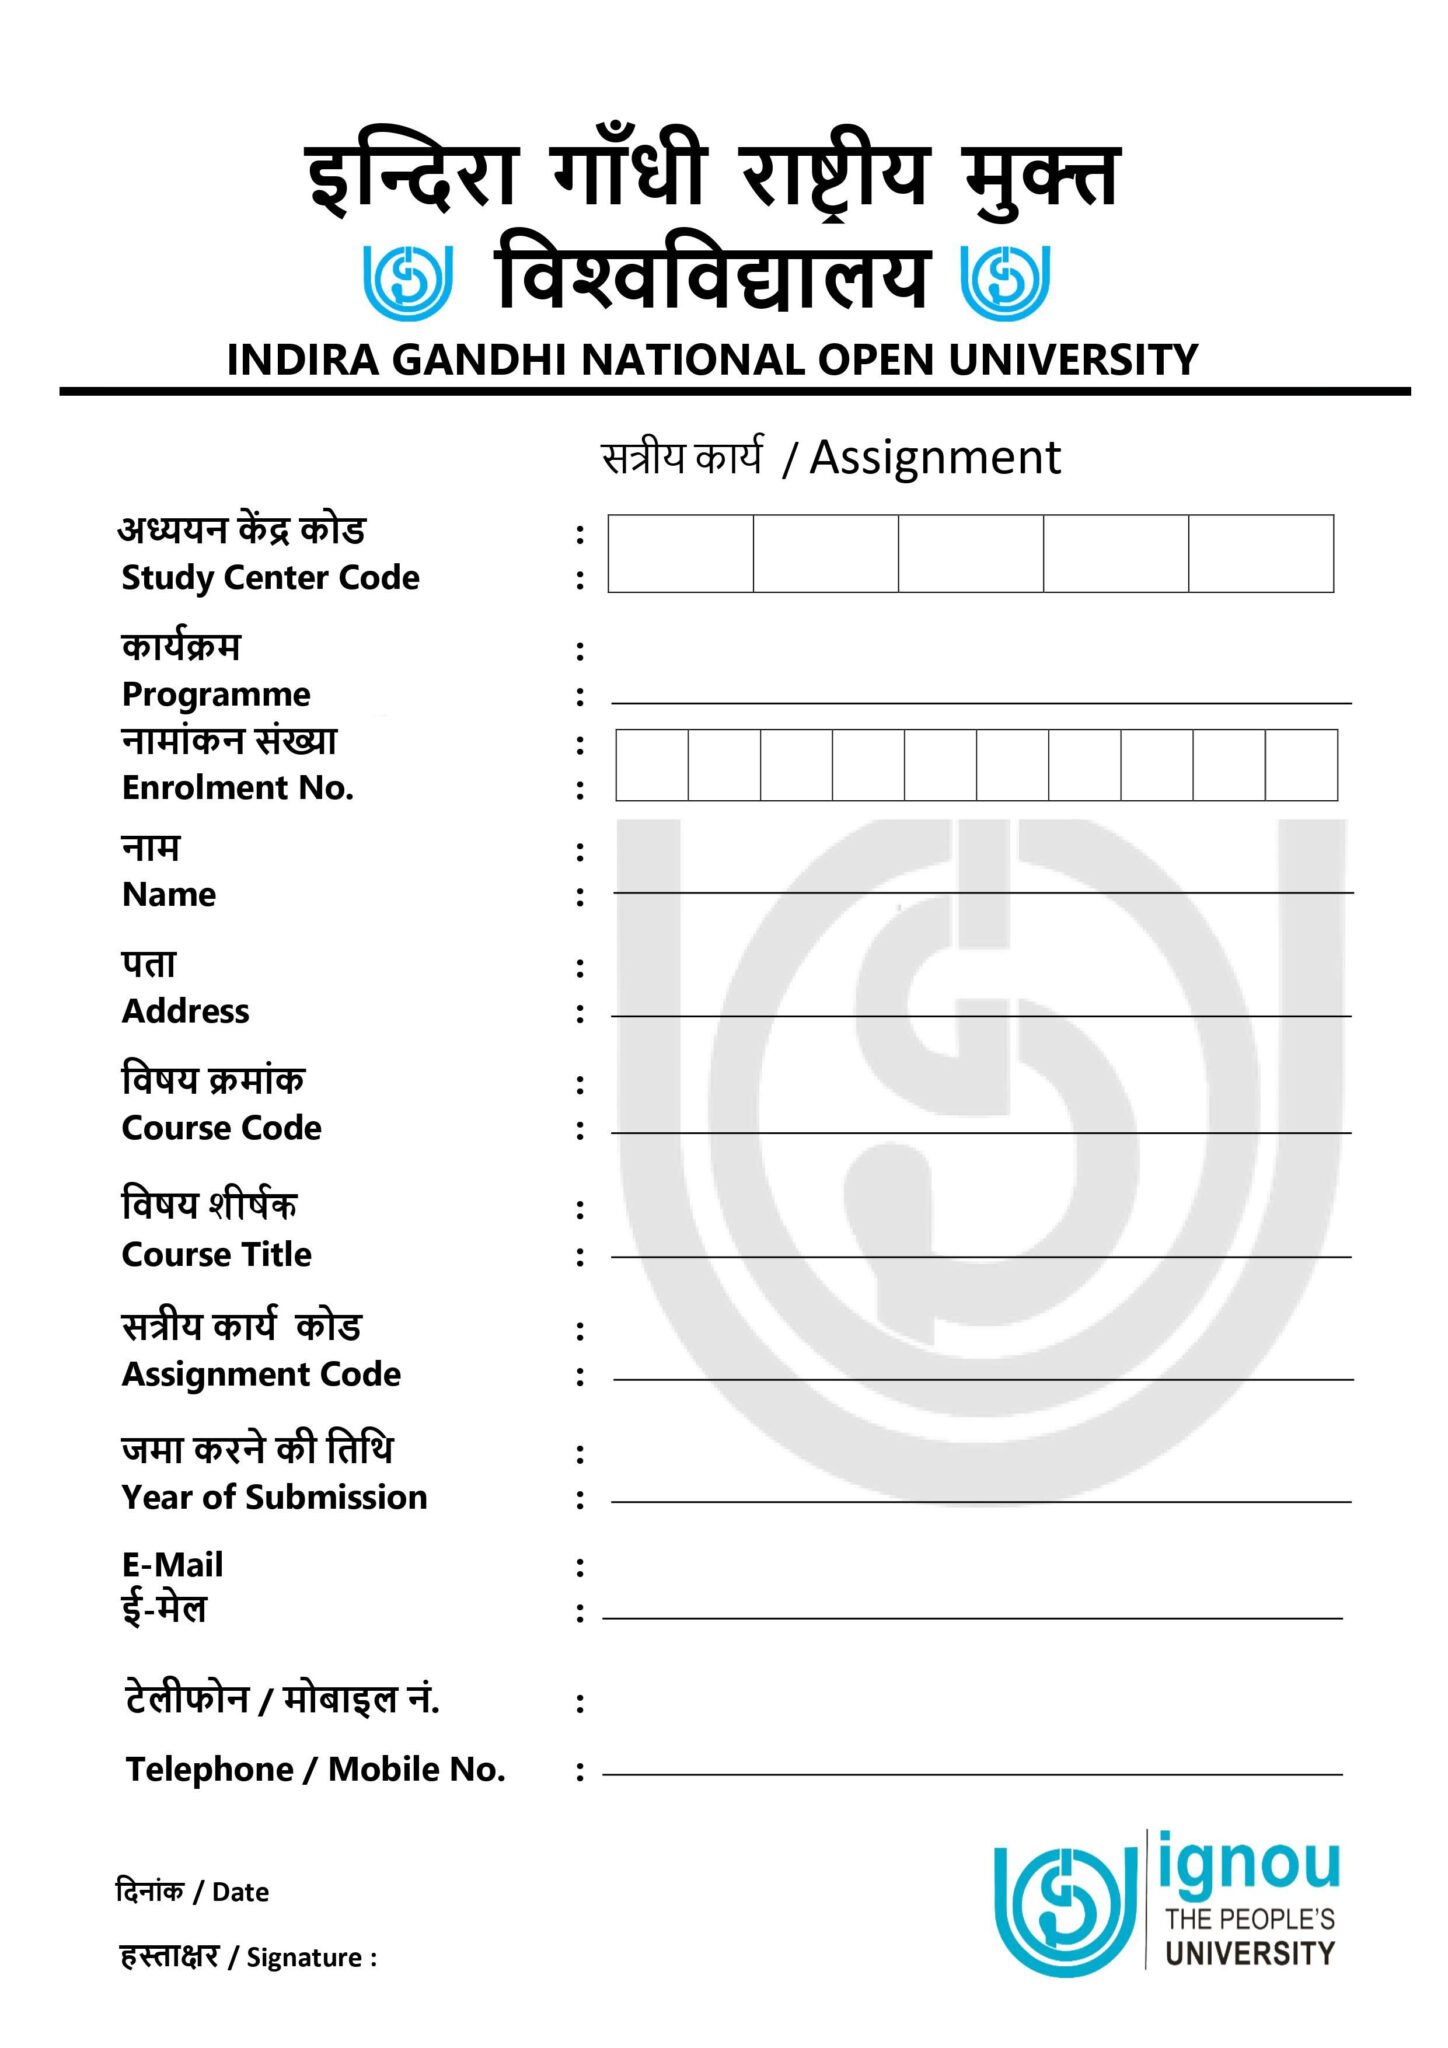 ignou assignment fees